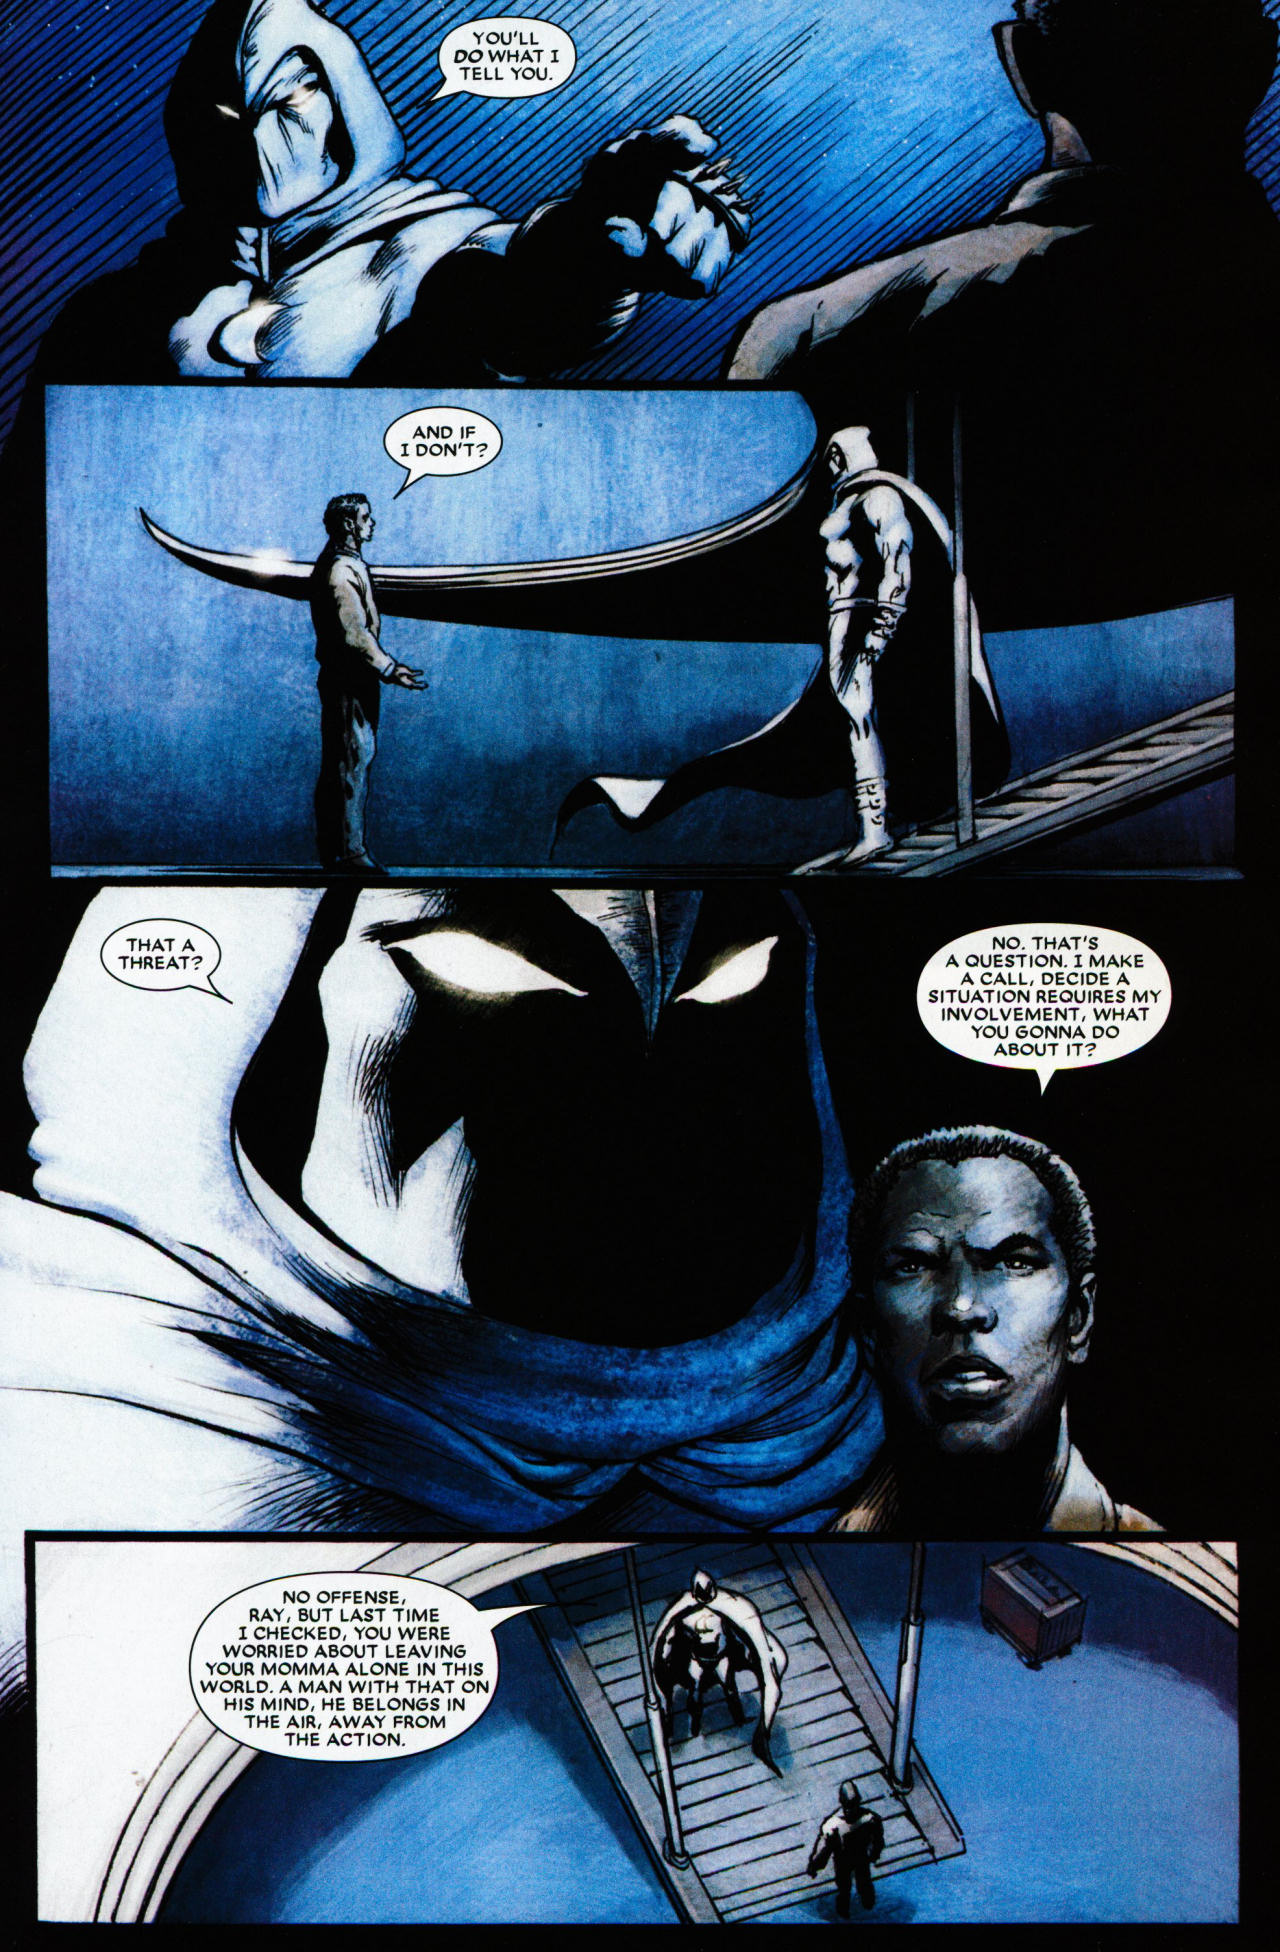  Moon Knight #16 - God And Country, Chapter Three